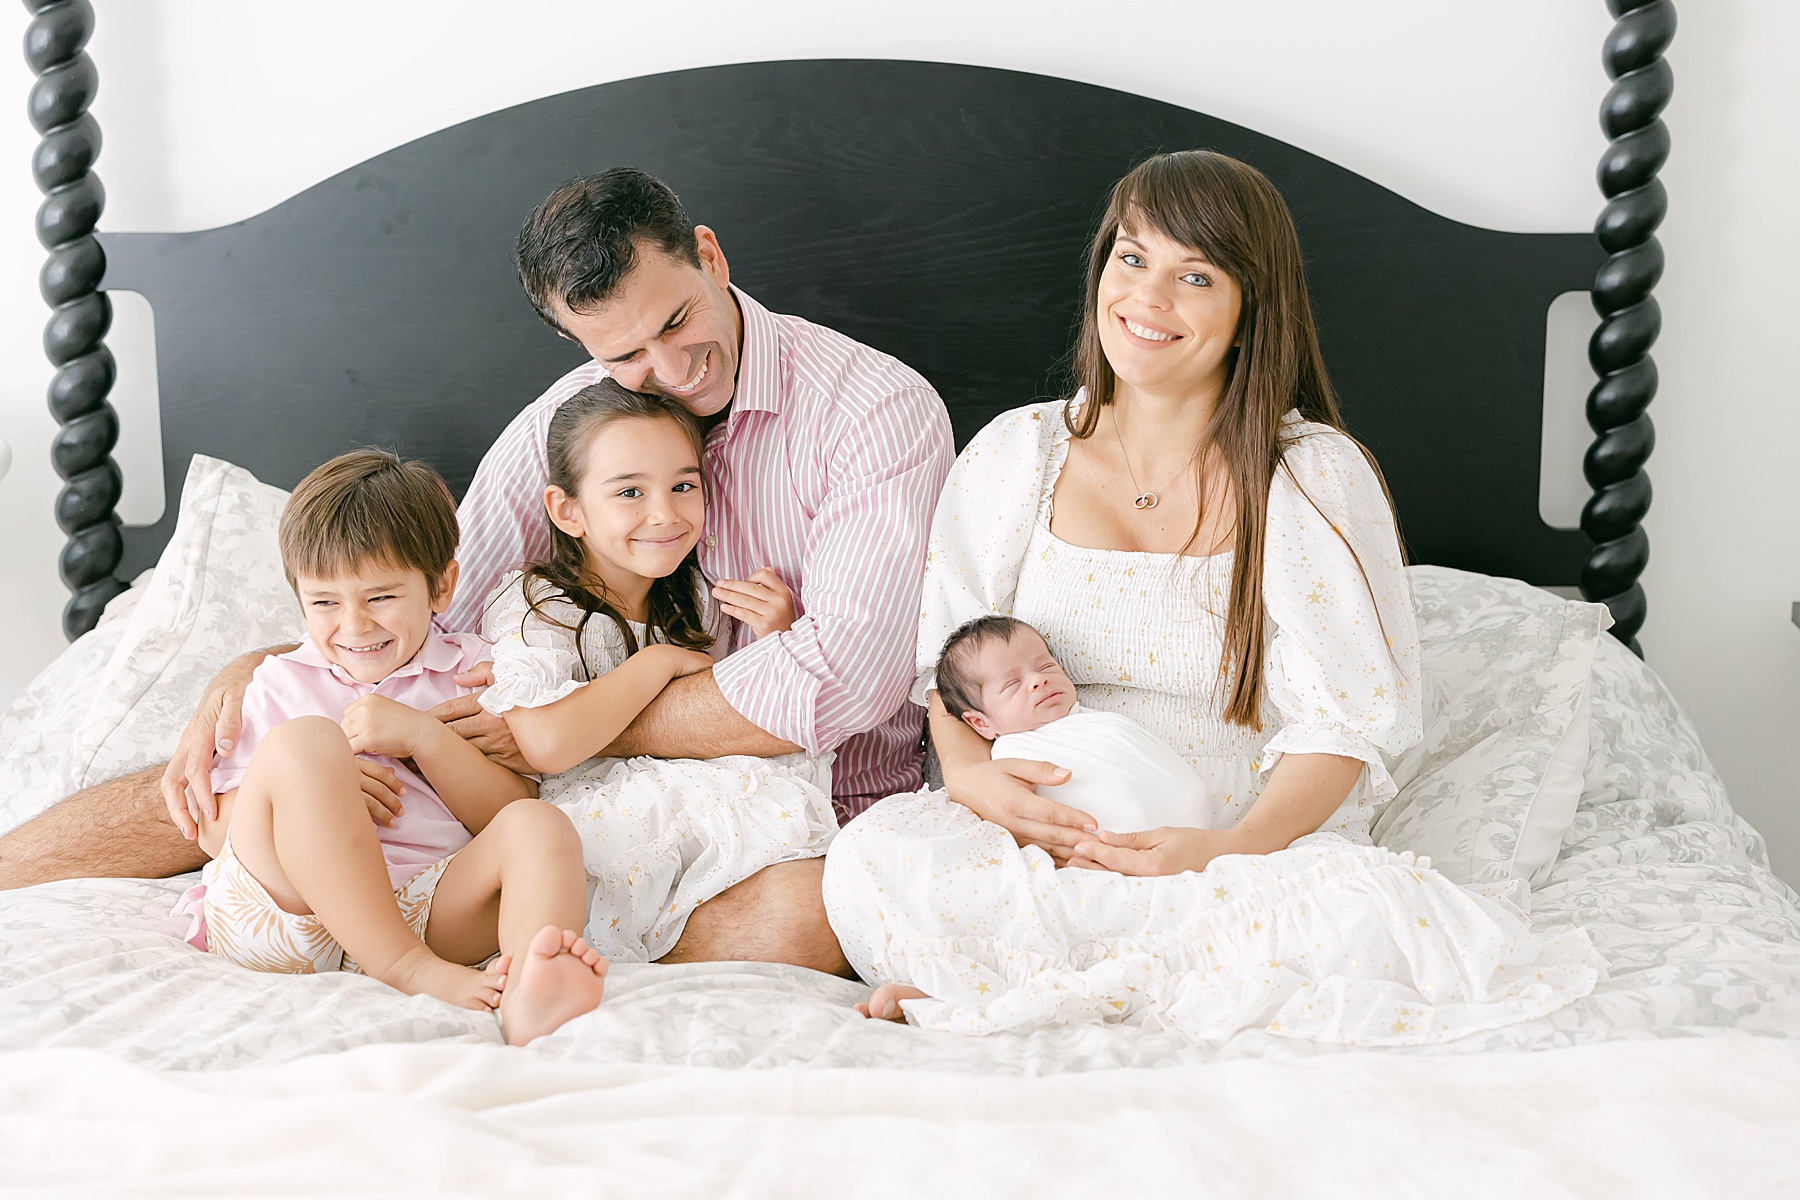 family sitting on be together white comforter holding newborn babty